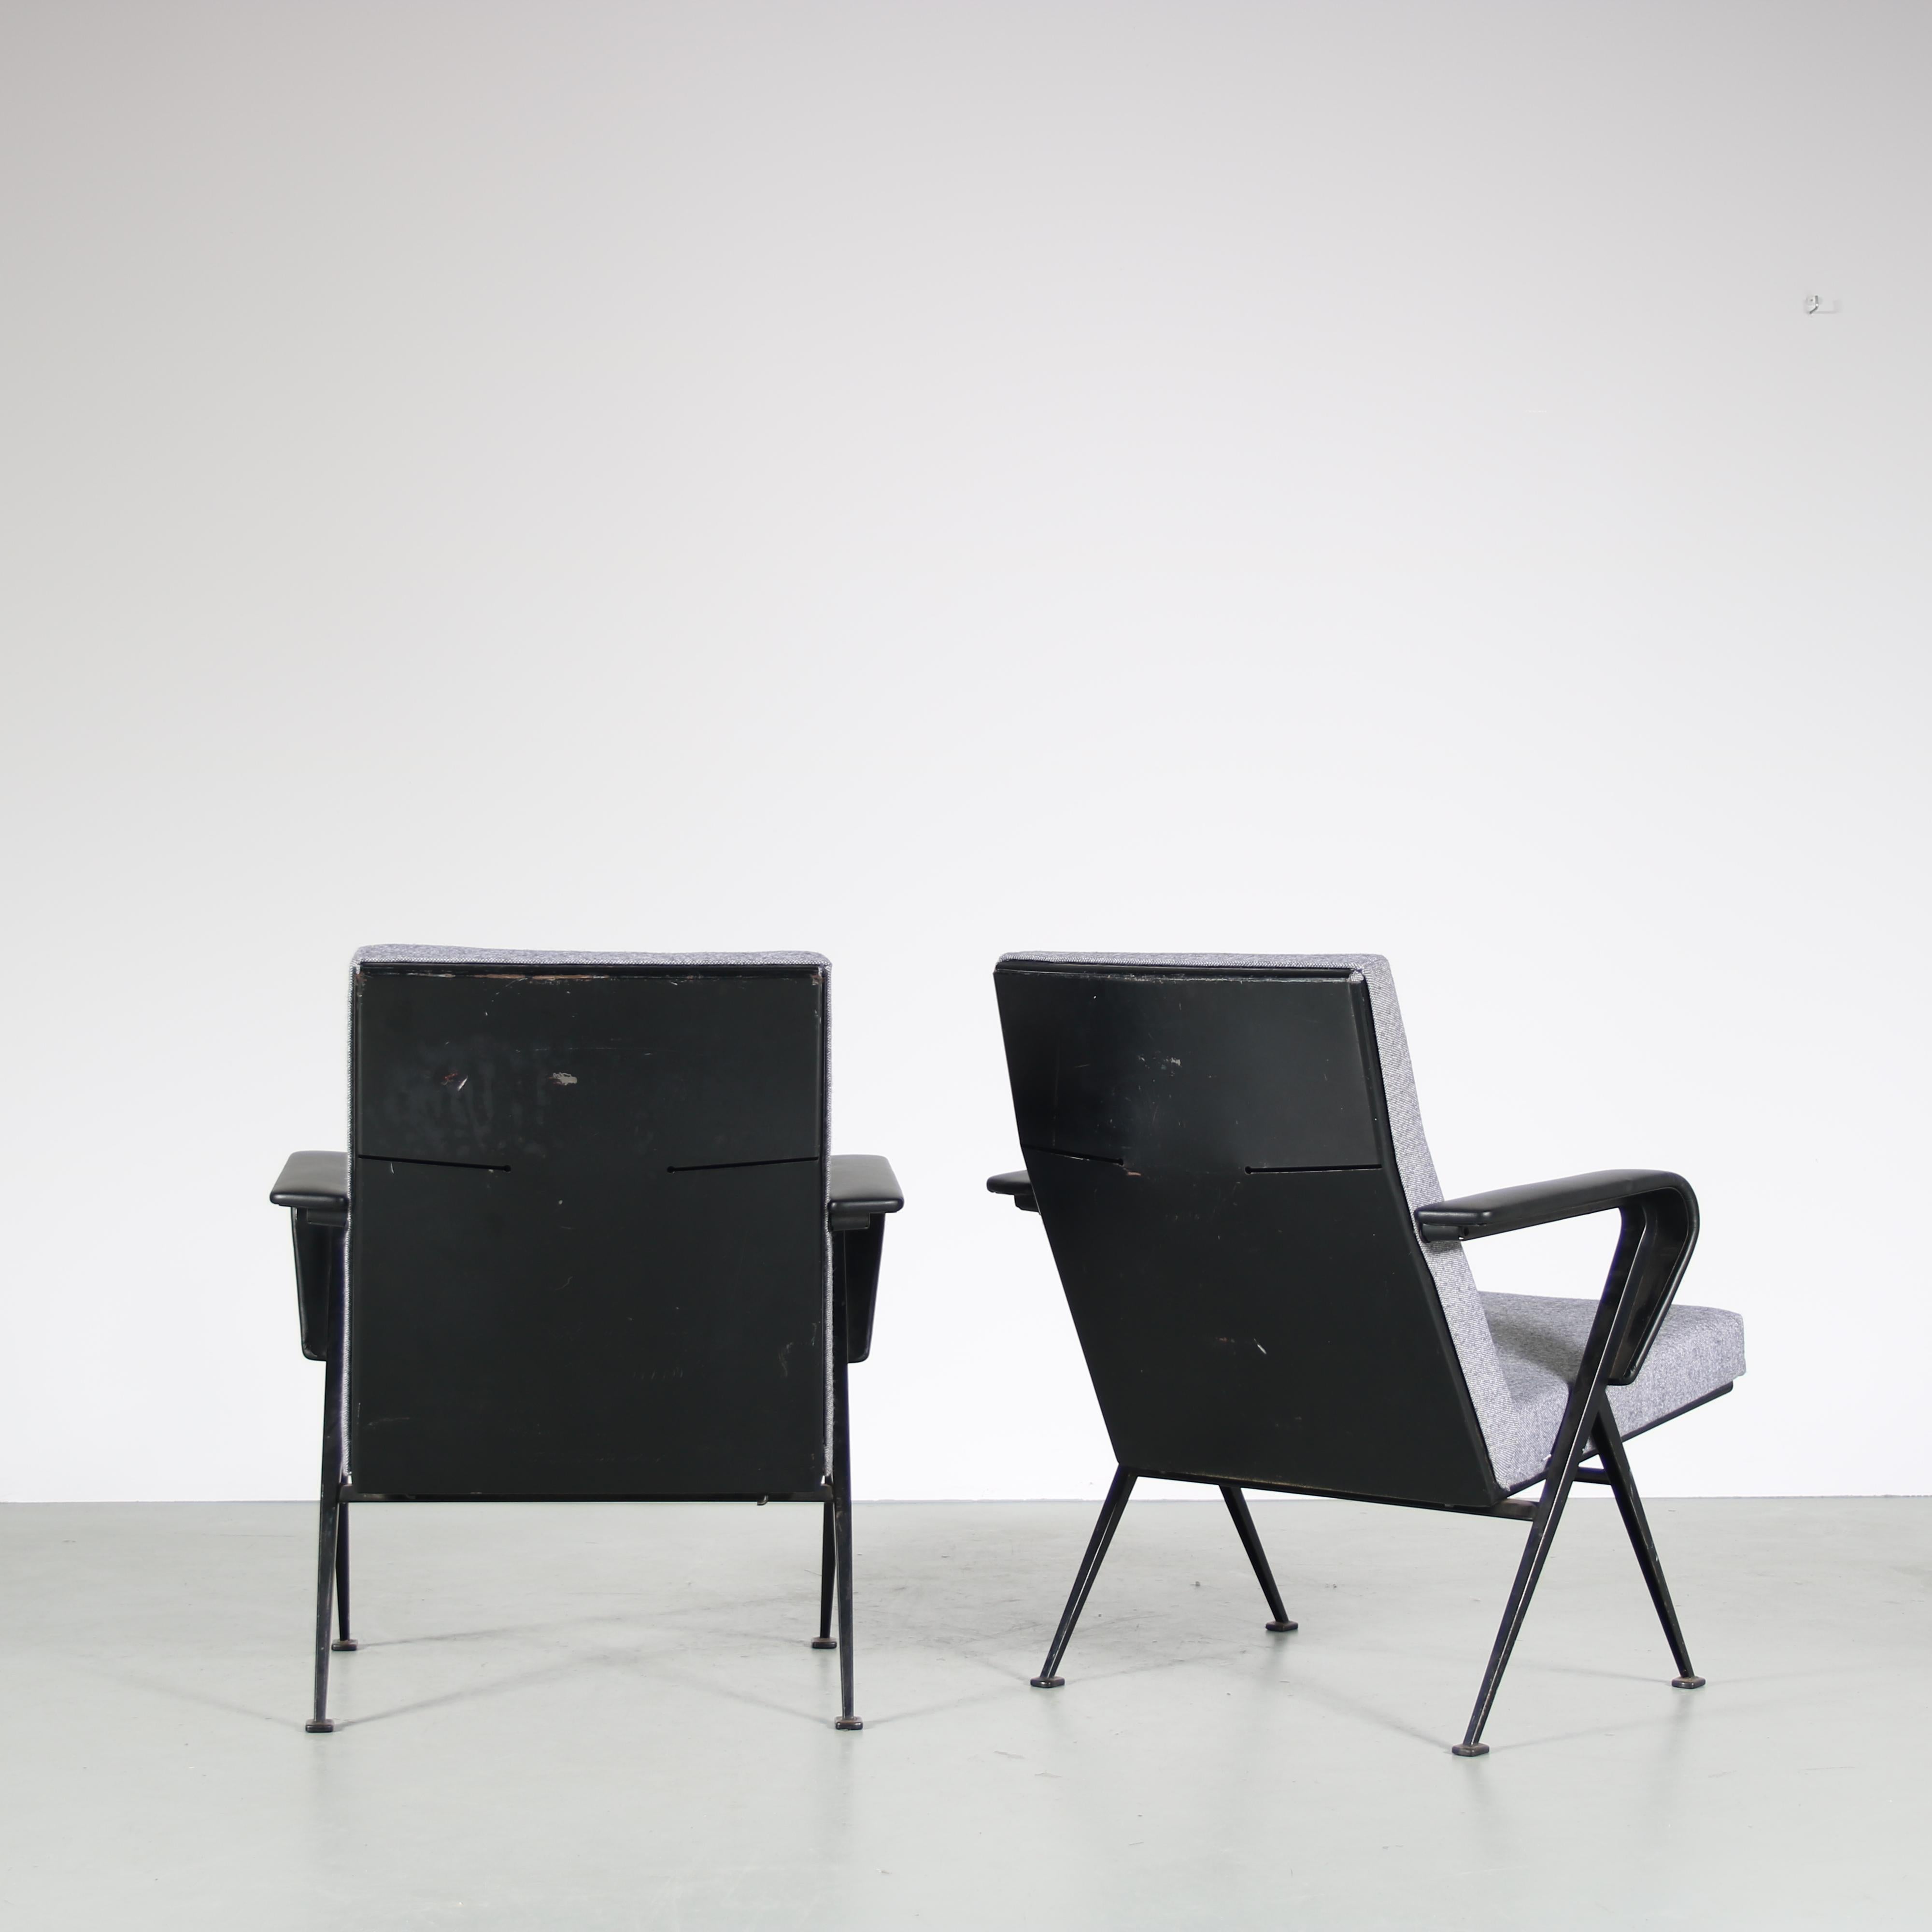 Metal 1960s Pair of “Repose” Chairs by Friso Kramer for Ahrend de Cirkel, Netherlands For Sale